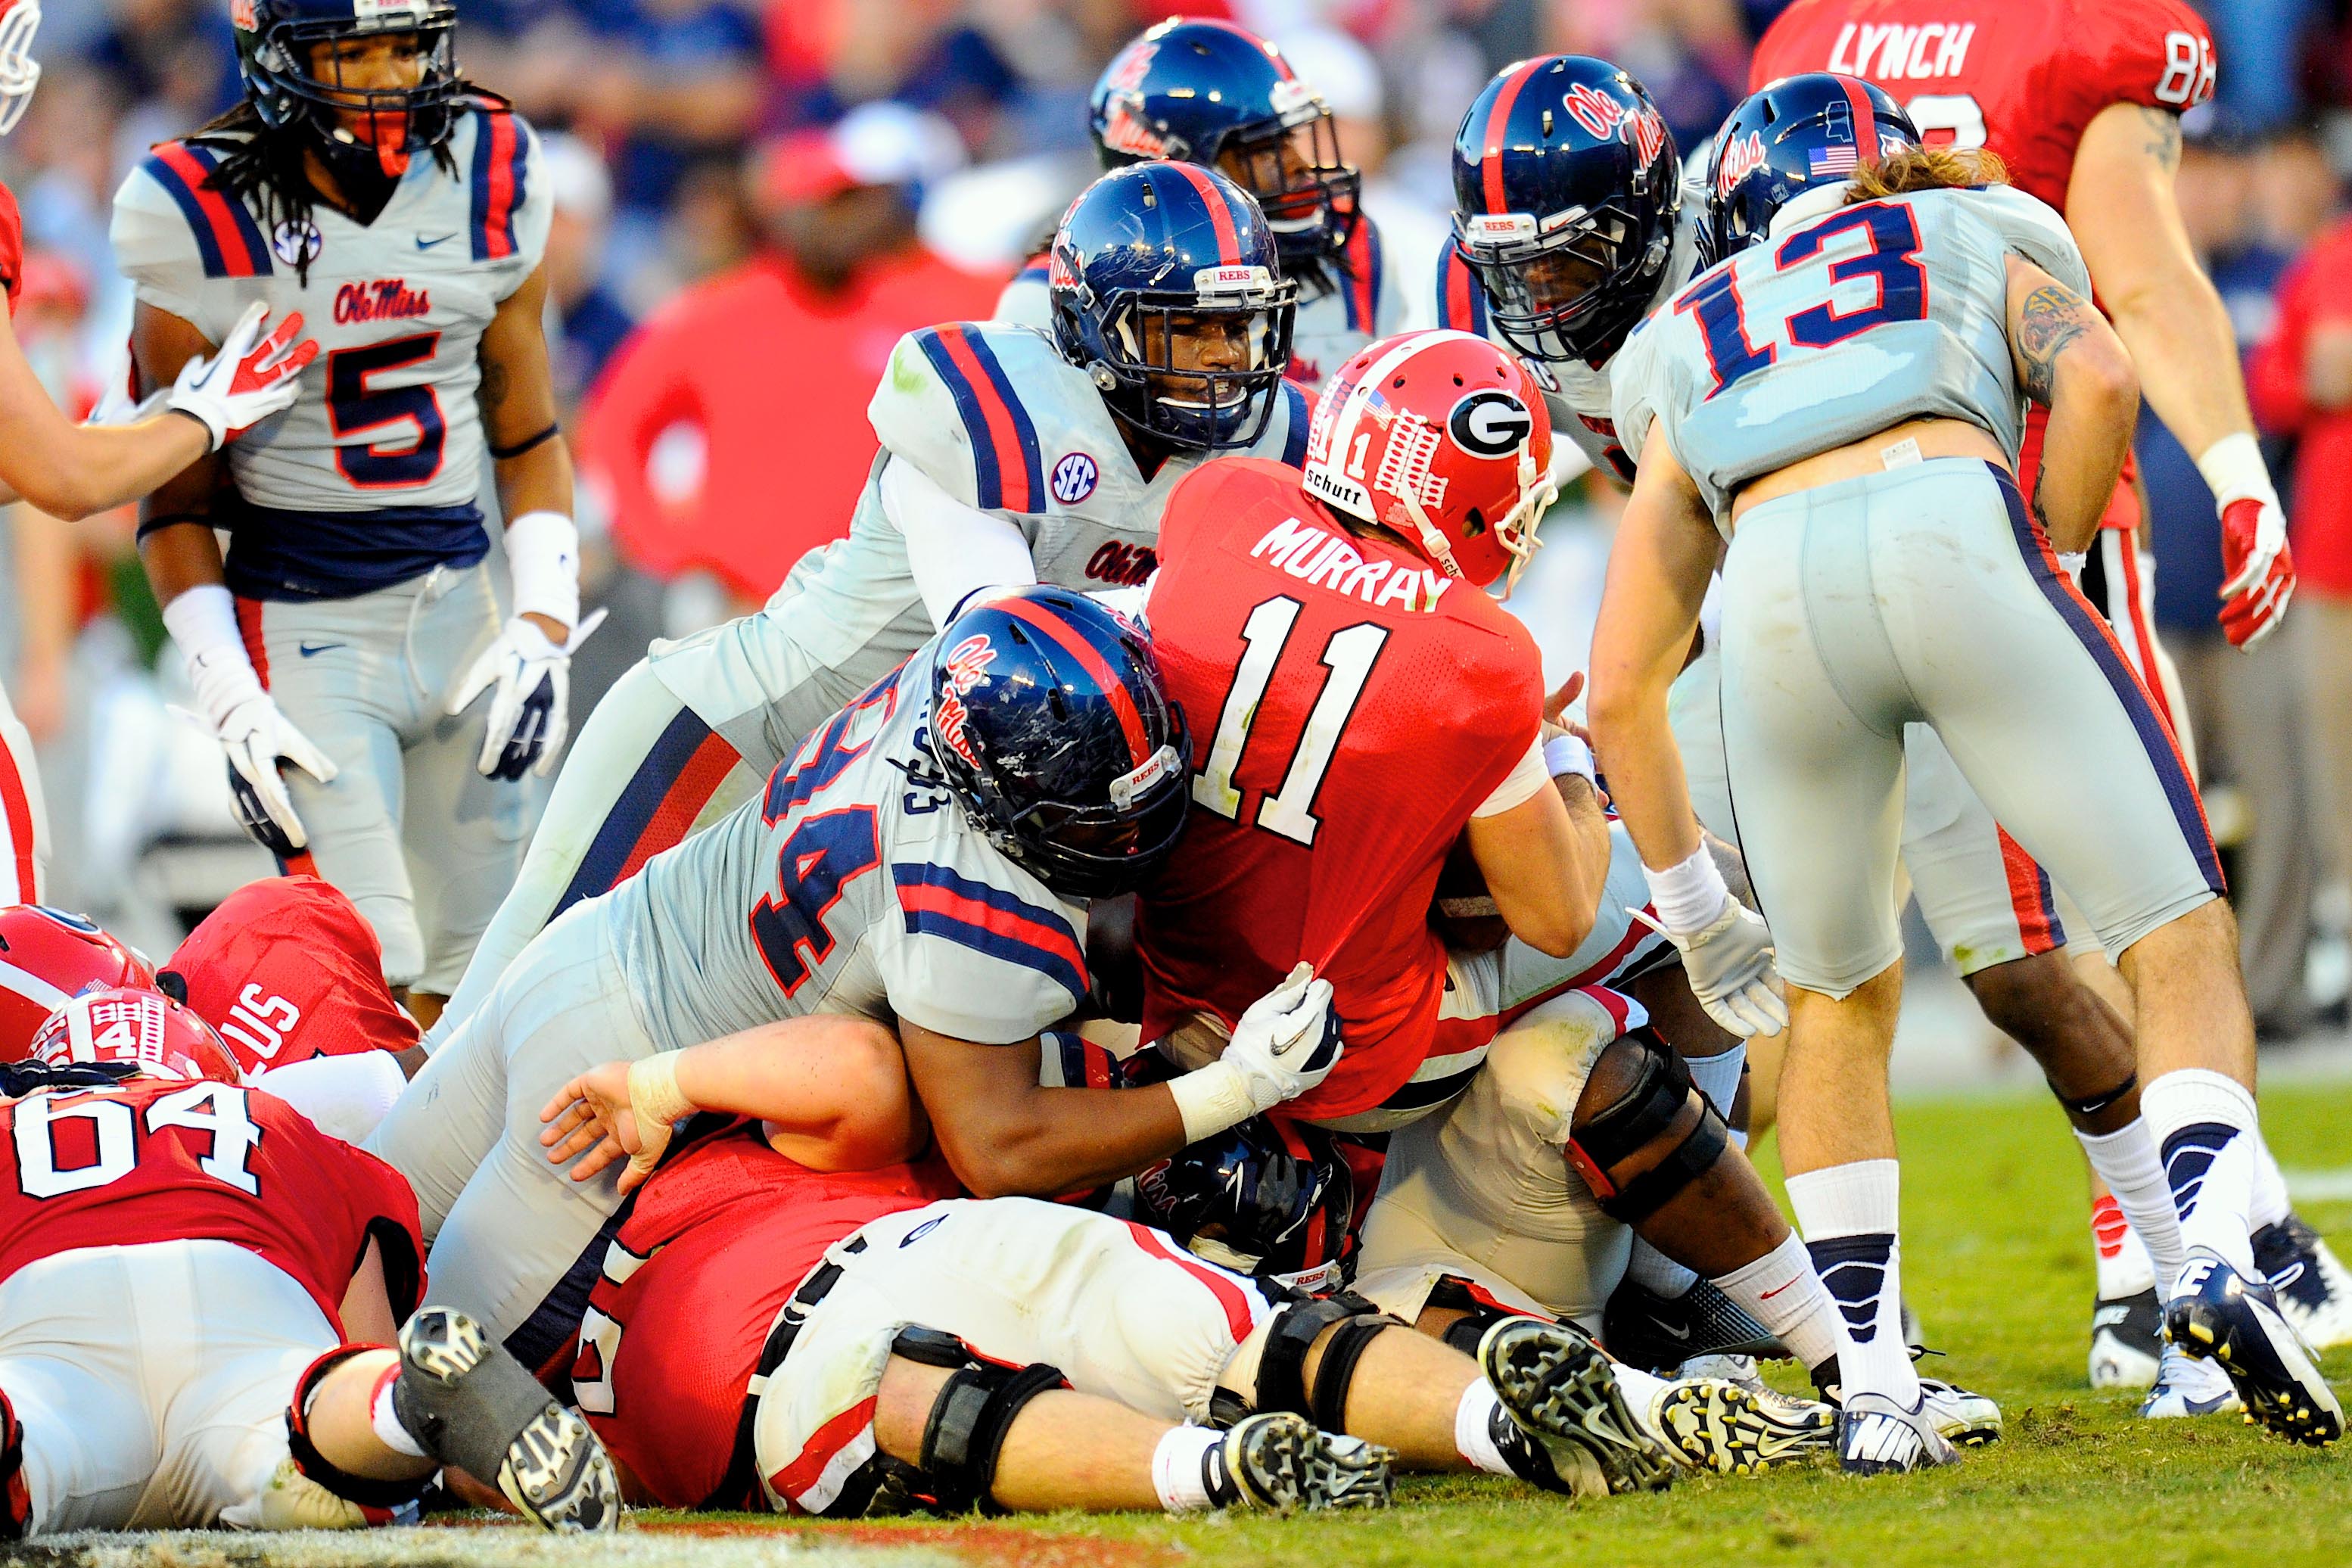 November 3, 2012; Athens, GA, USA; Georgia Bulldogs quarterback Aaron Murray (11) is sacked by Mississippi Rebels defensive lineman Issac Gross (94) during the fourth quarter at Sanford Stadium. Georgia defeated Mississippi 37-10. Mandatory Credit: Dale Zanine-USA TODAY Sports